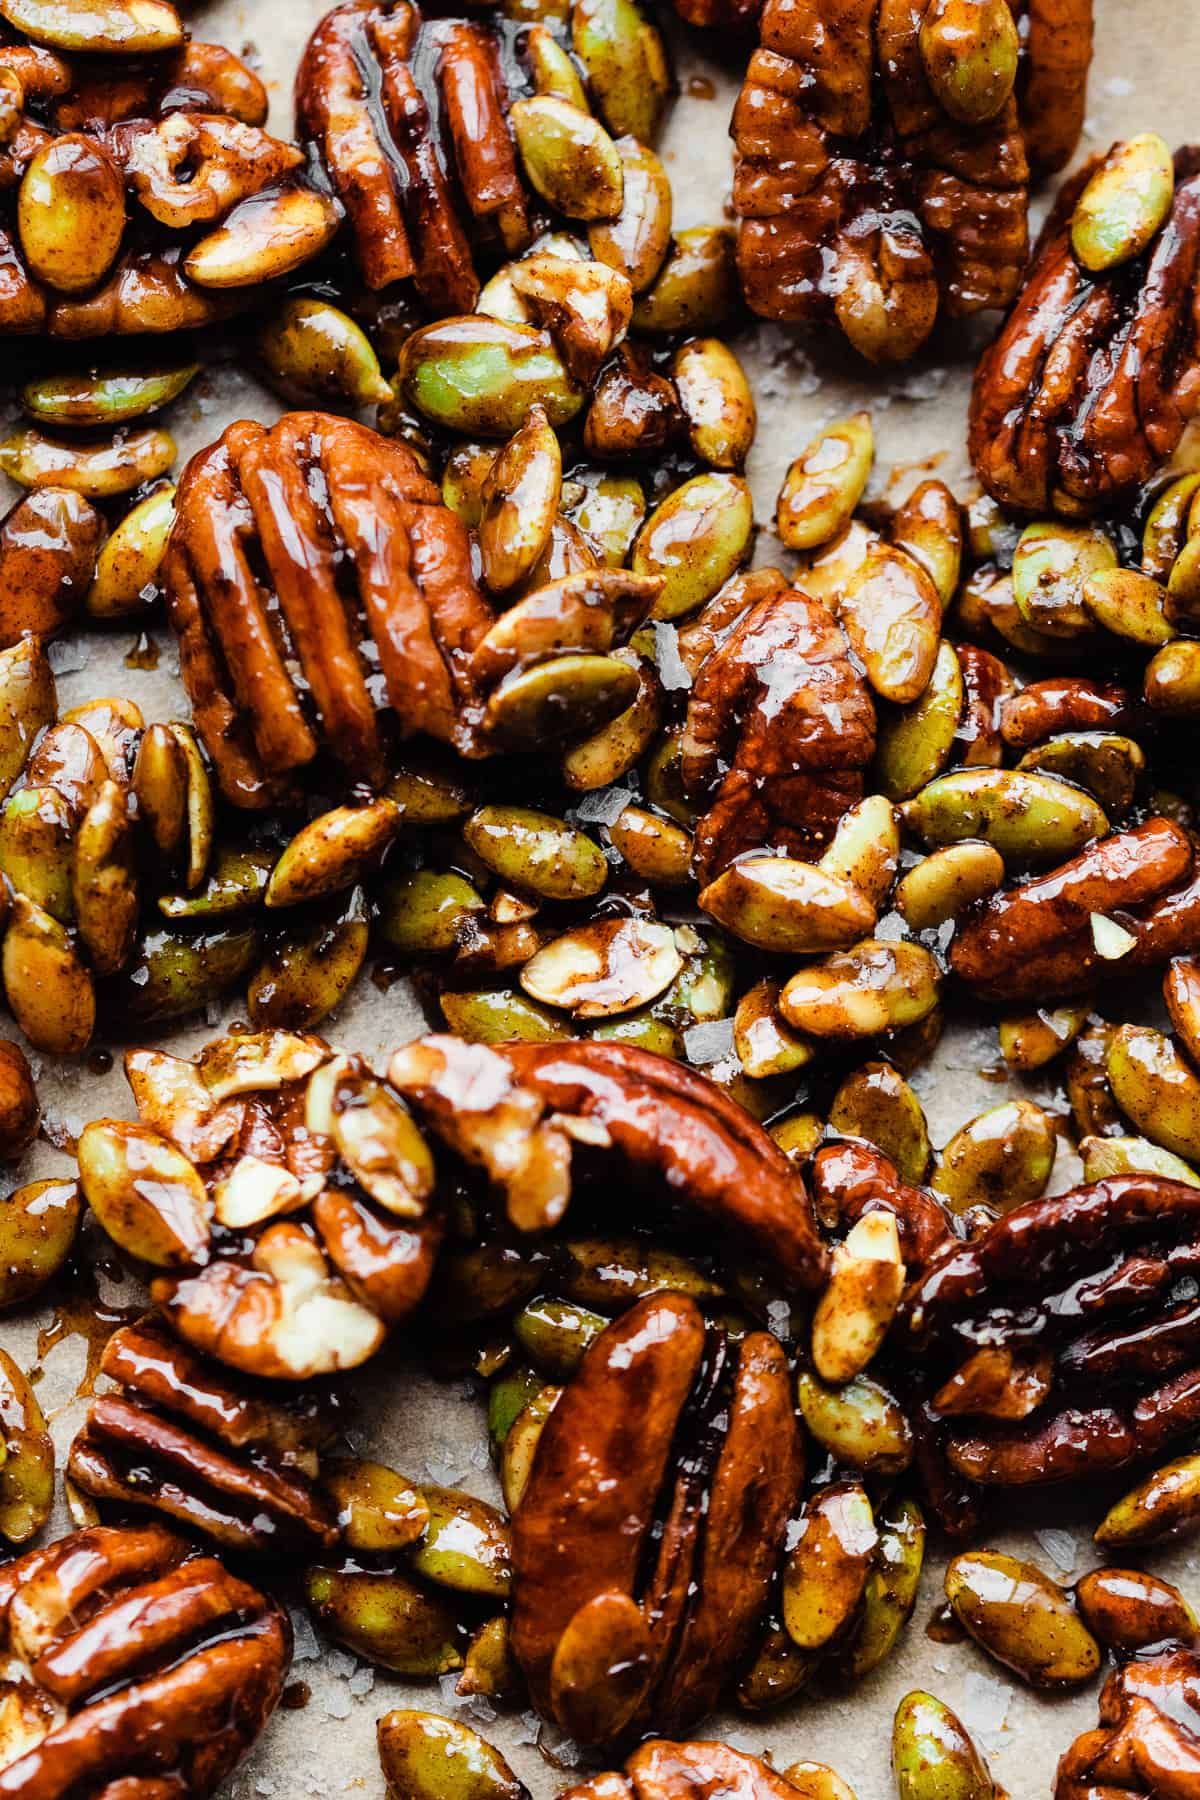 A close-up of candied pecans and pepitas on a baking sheet.